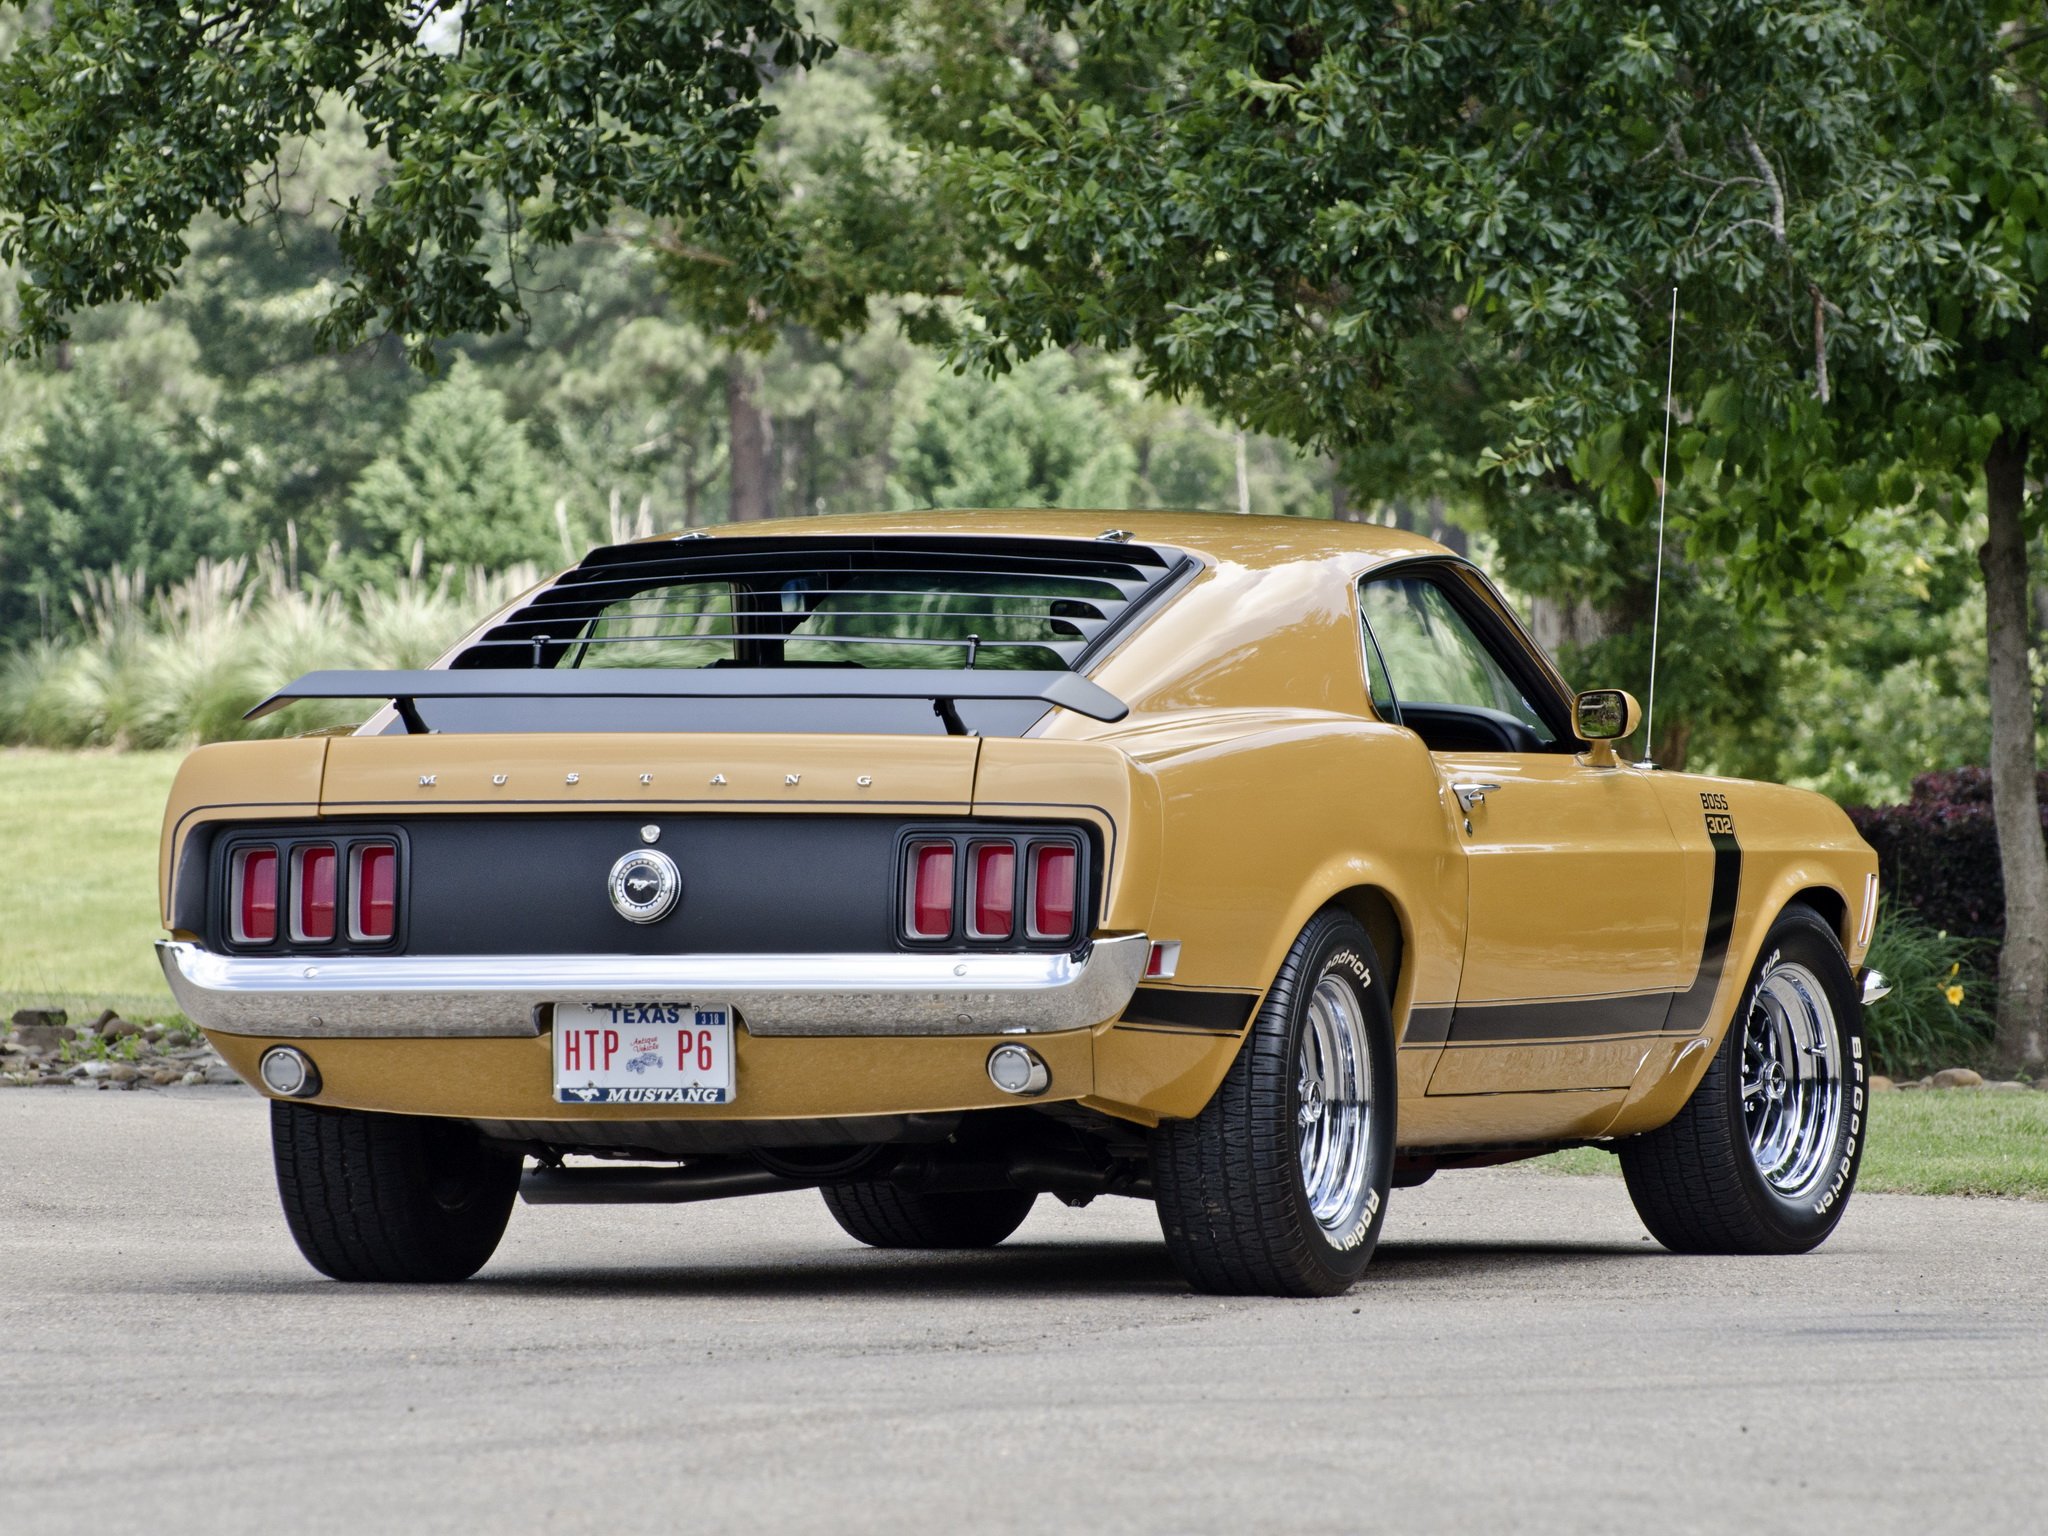 1970 Ford Mustang Boss 3 02muscle Classic Wallpapers Hd Desktop And Mobile Backgrounds